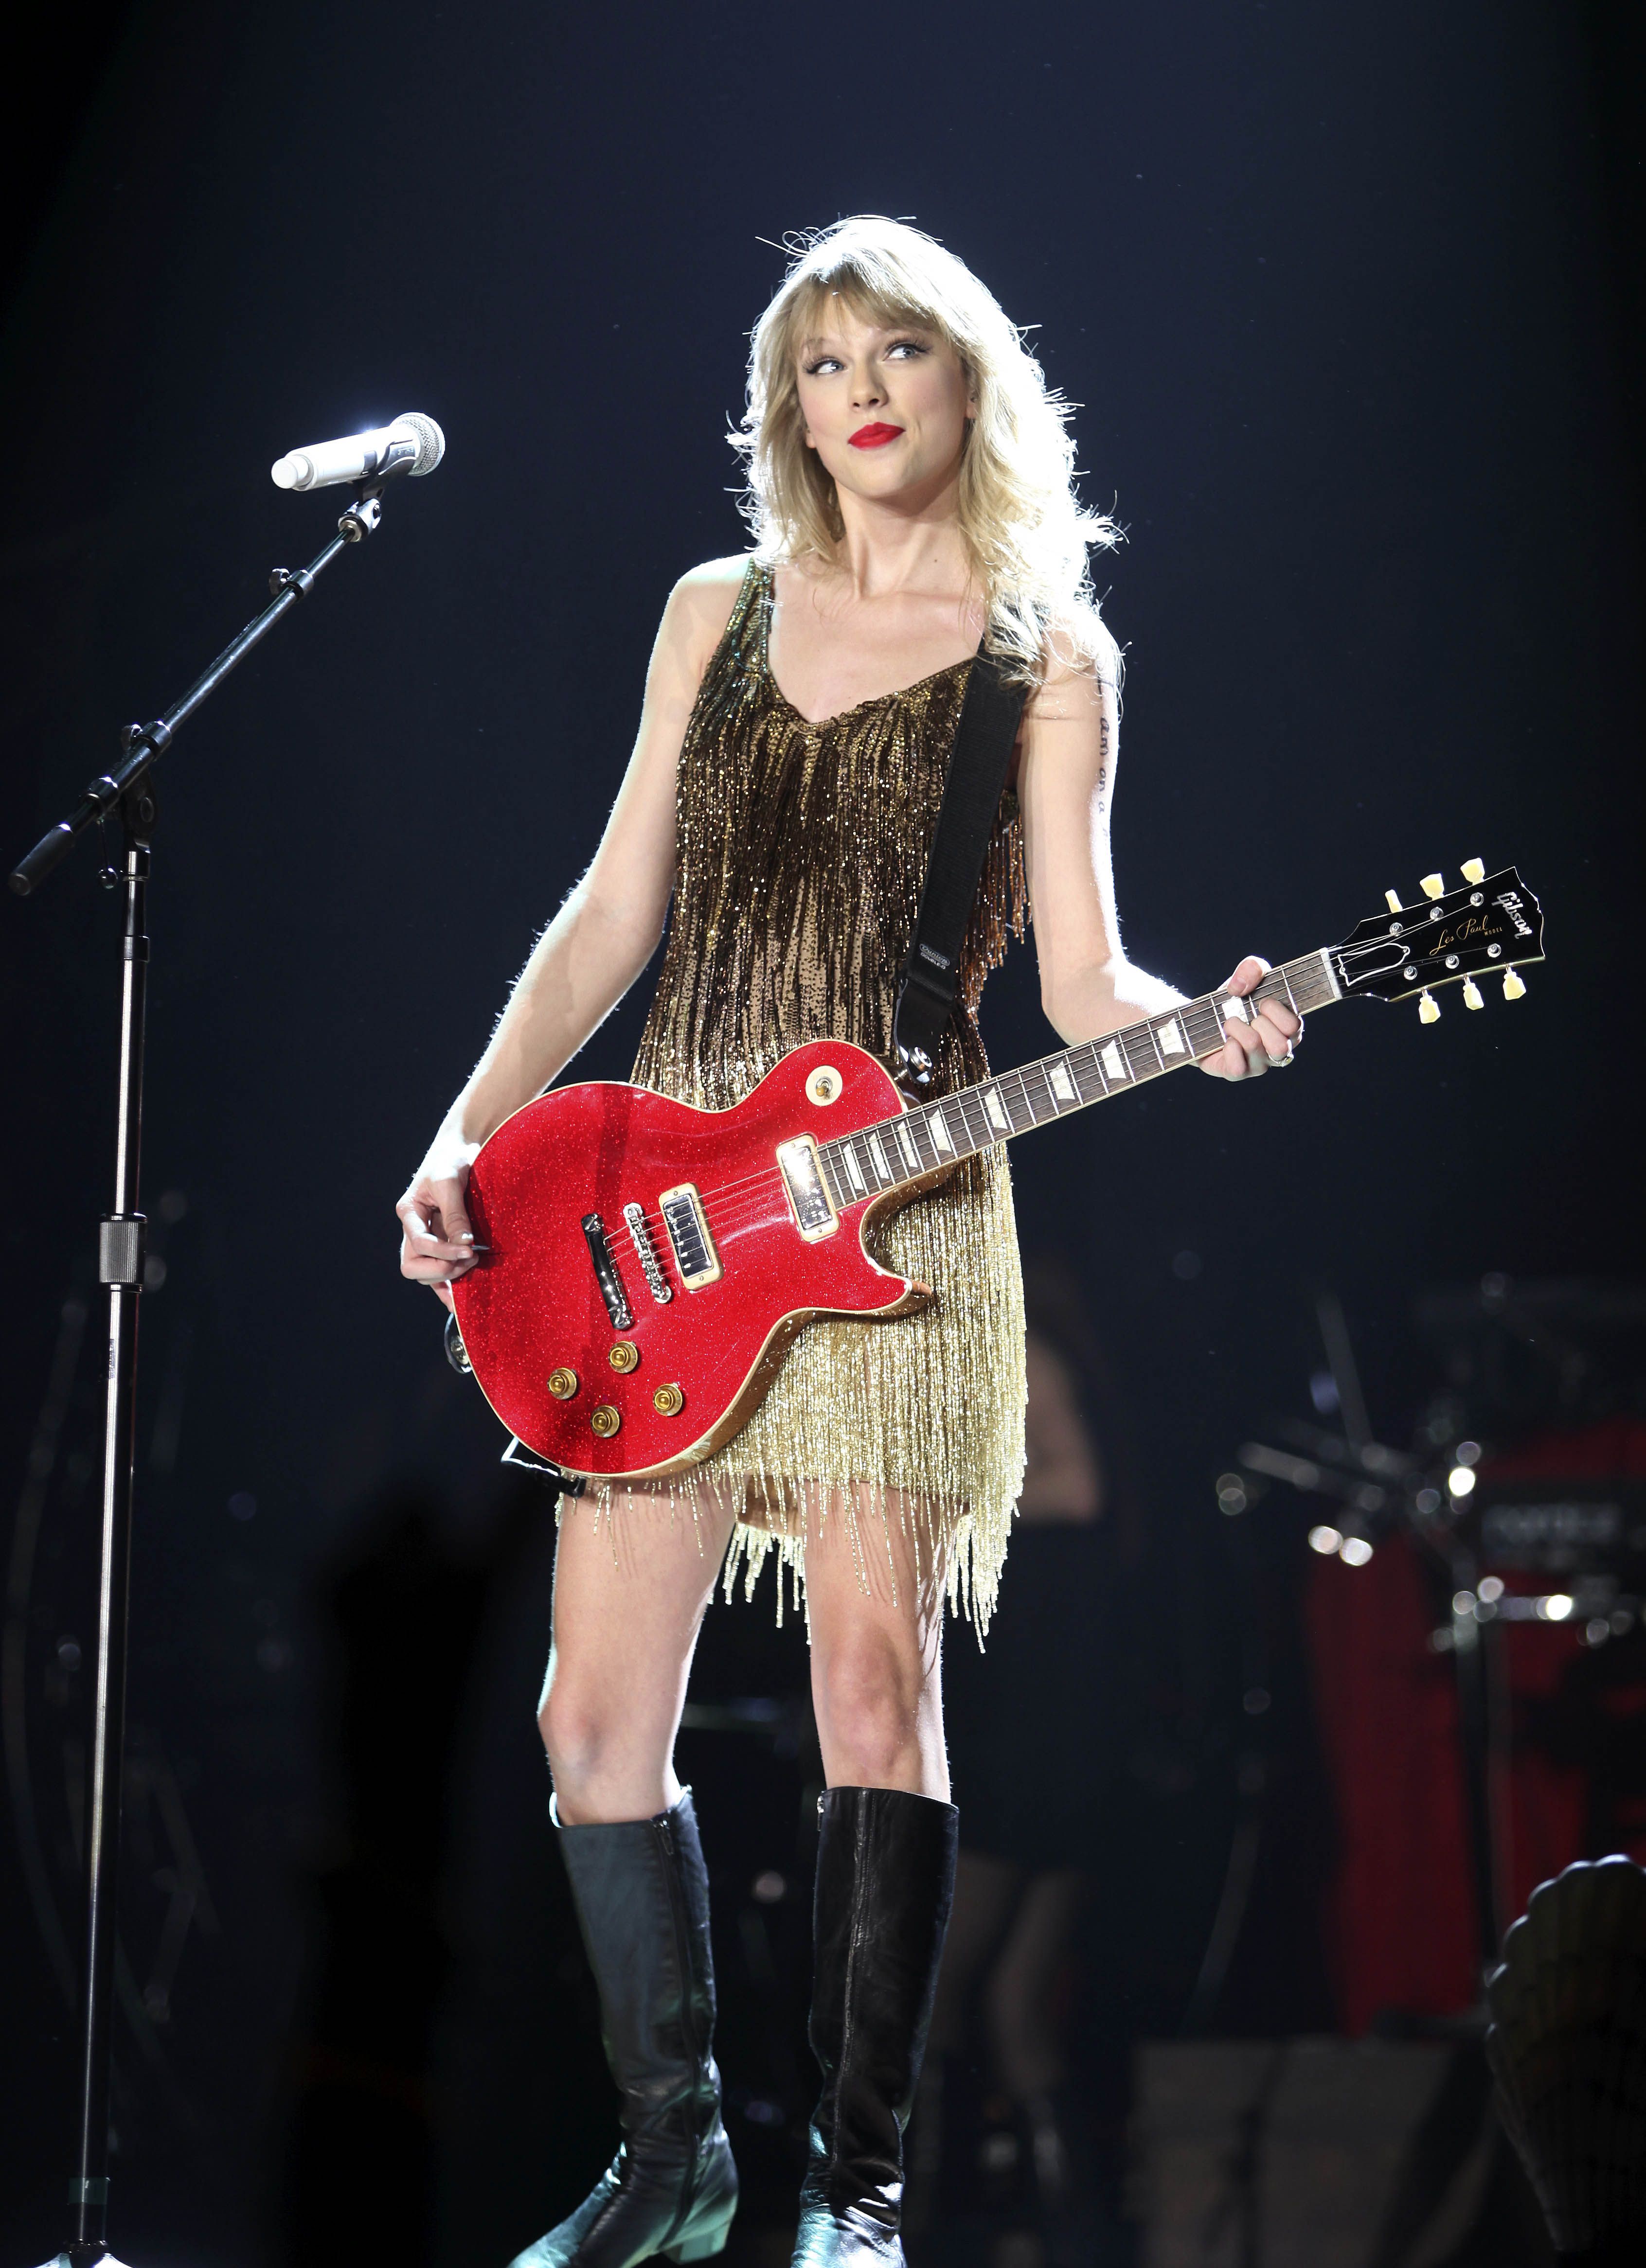 Picture of Taylor Swift in Speak Now World Tour - taylor-swift-1330716935.jpg | Teen ...